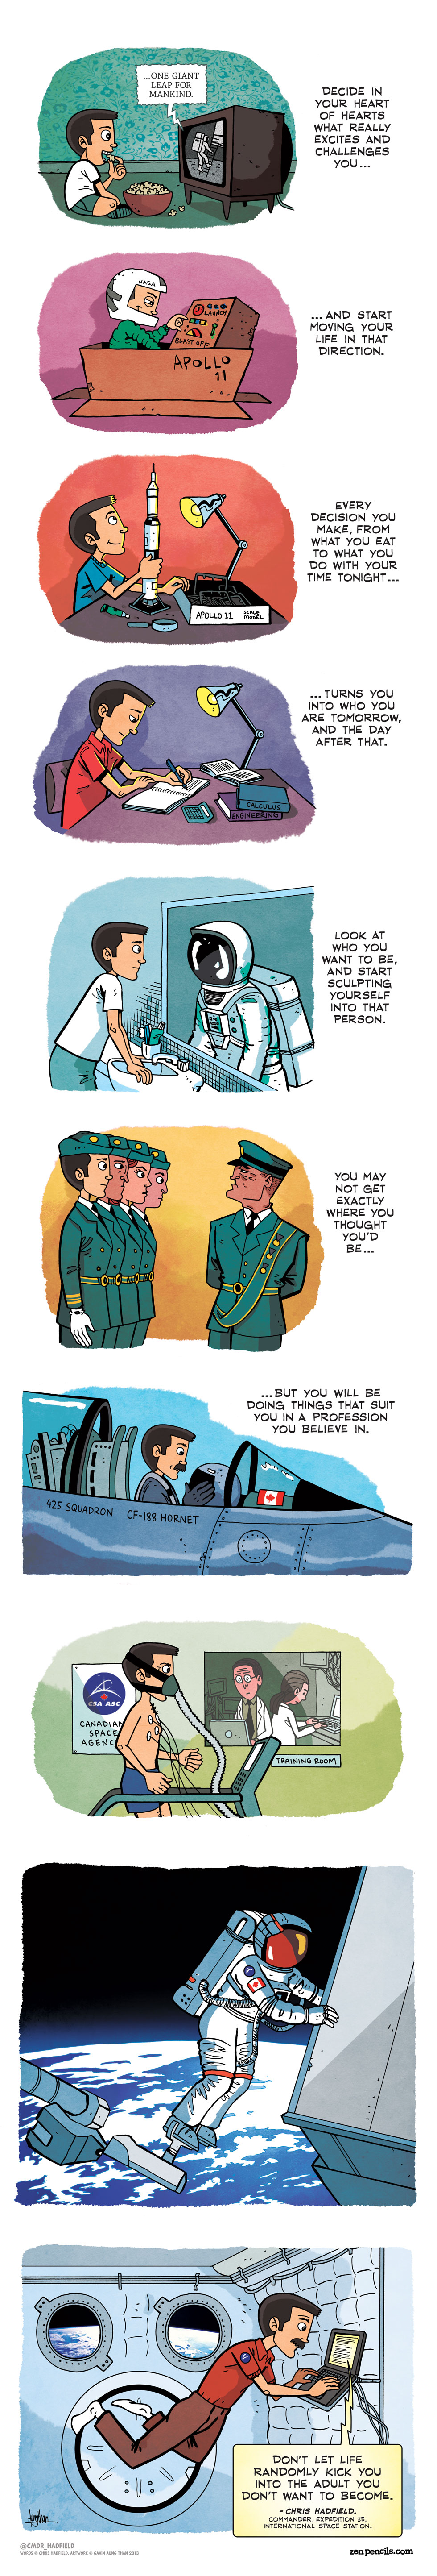 This strip features advice Commander Chris Hadfield delivered during a Reddit AMA (Credits: Gavin Aung Than/zenpencils.com).